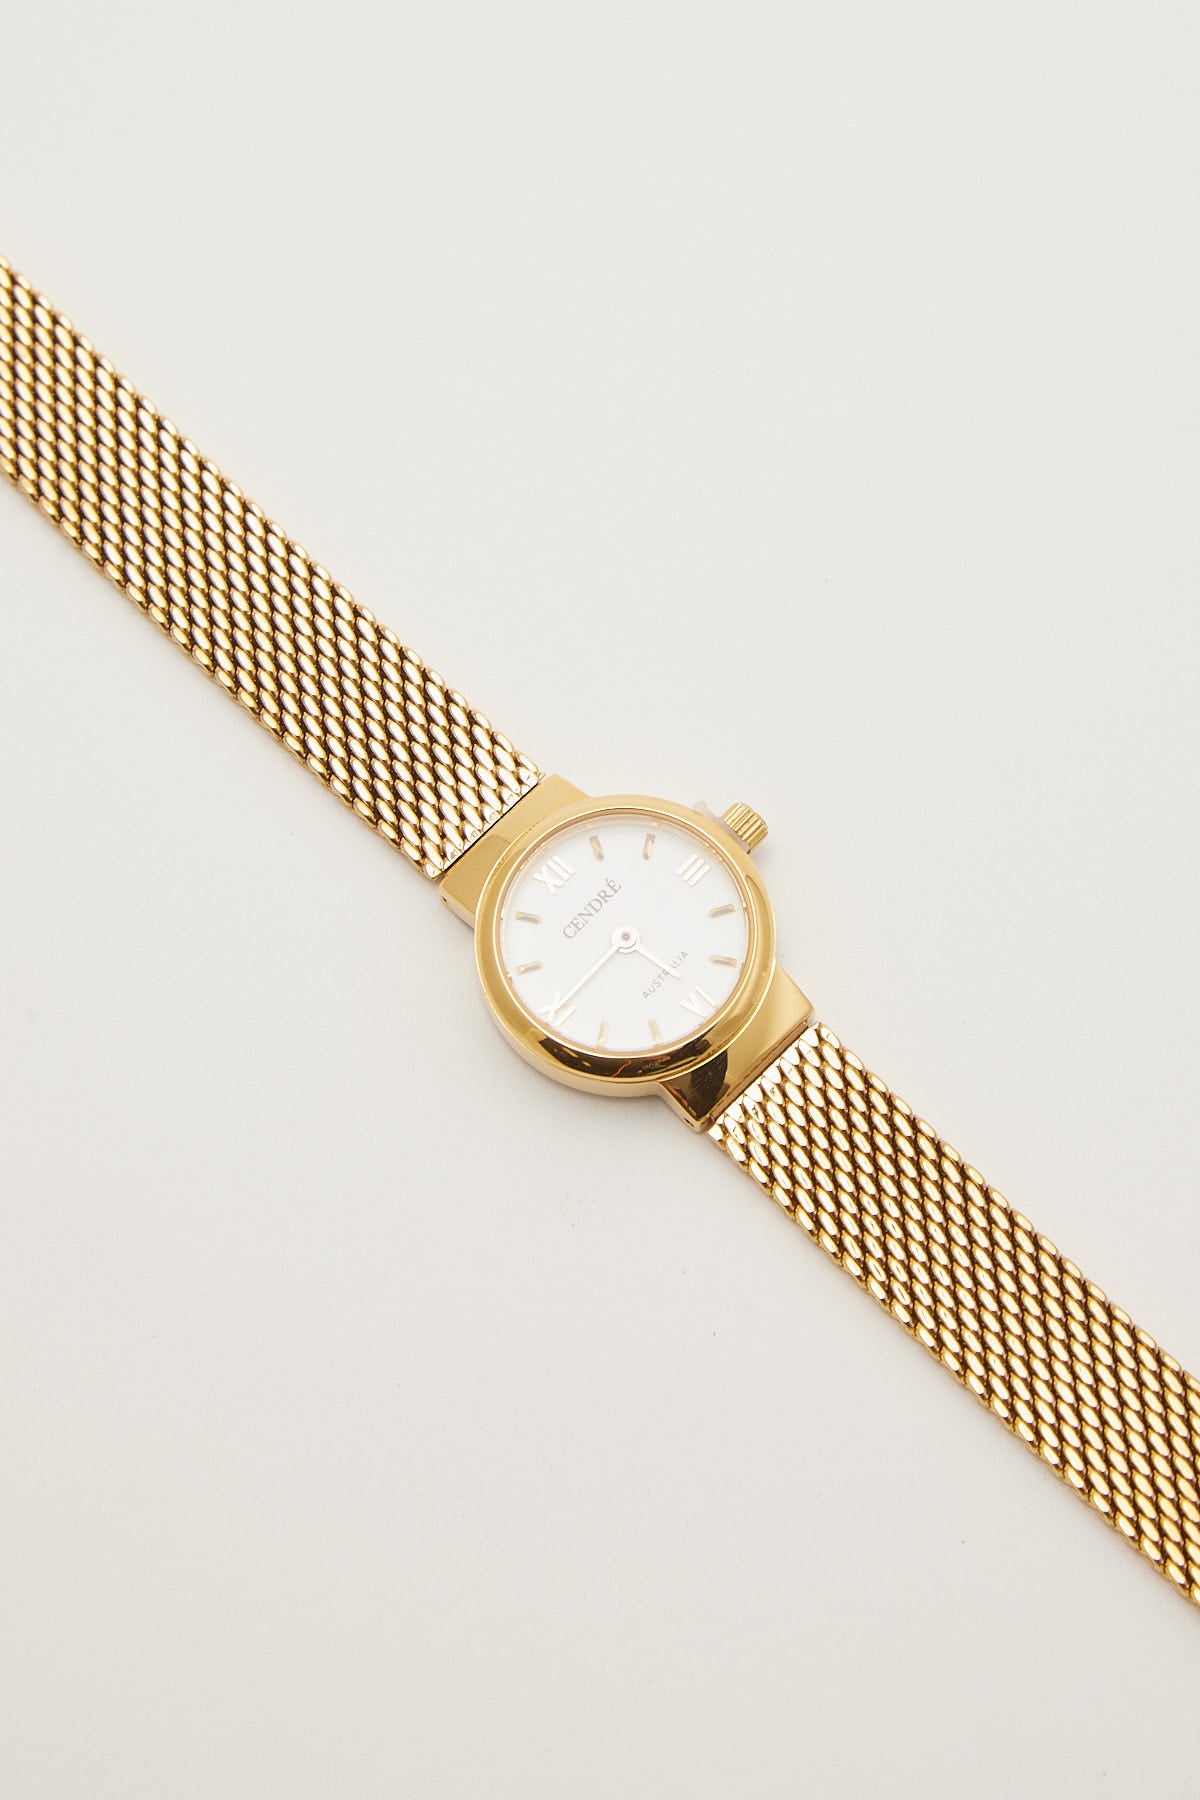 Cendre Camille Watch Gold/White